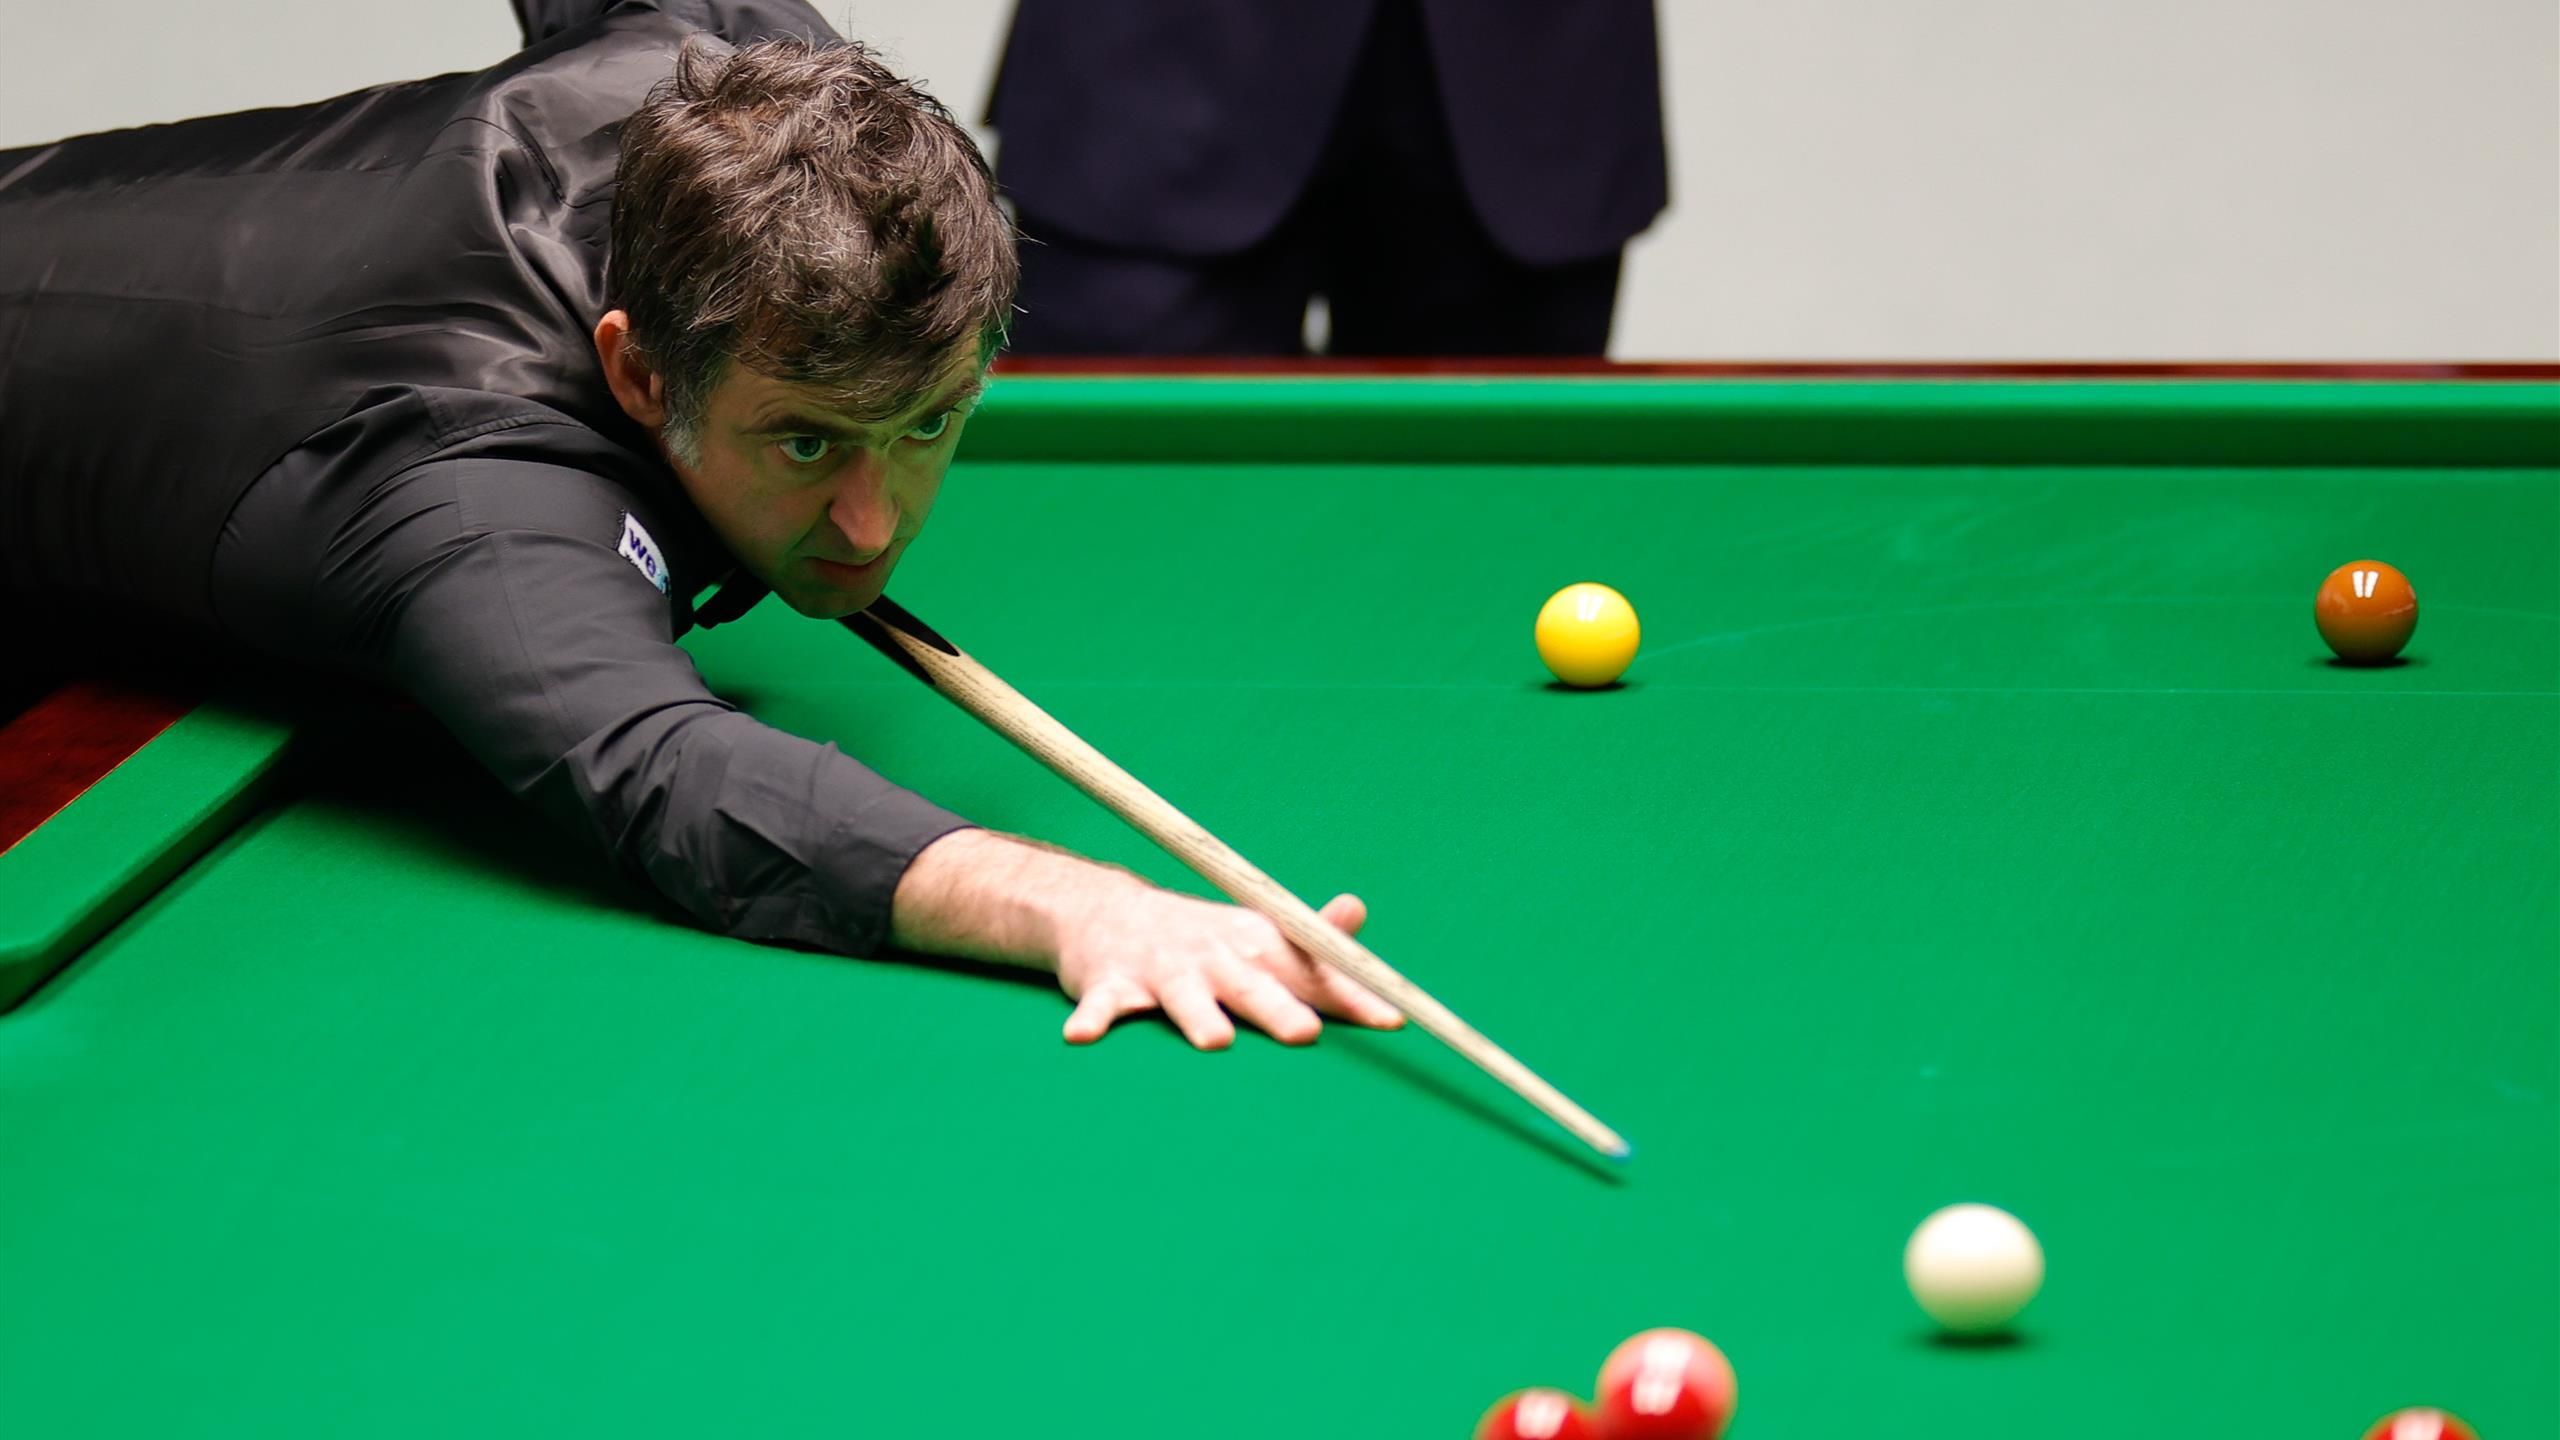 Michael Holt offers coaching opinion on what makes Ronnie OSullivan the snooker GOAT